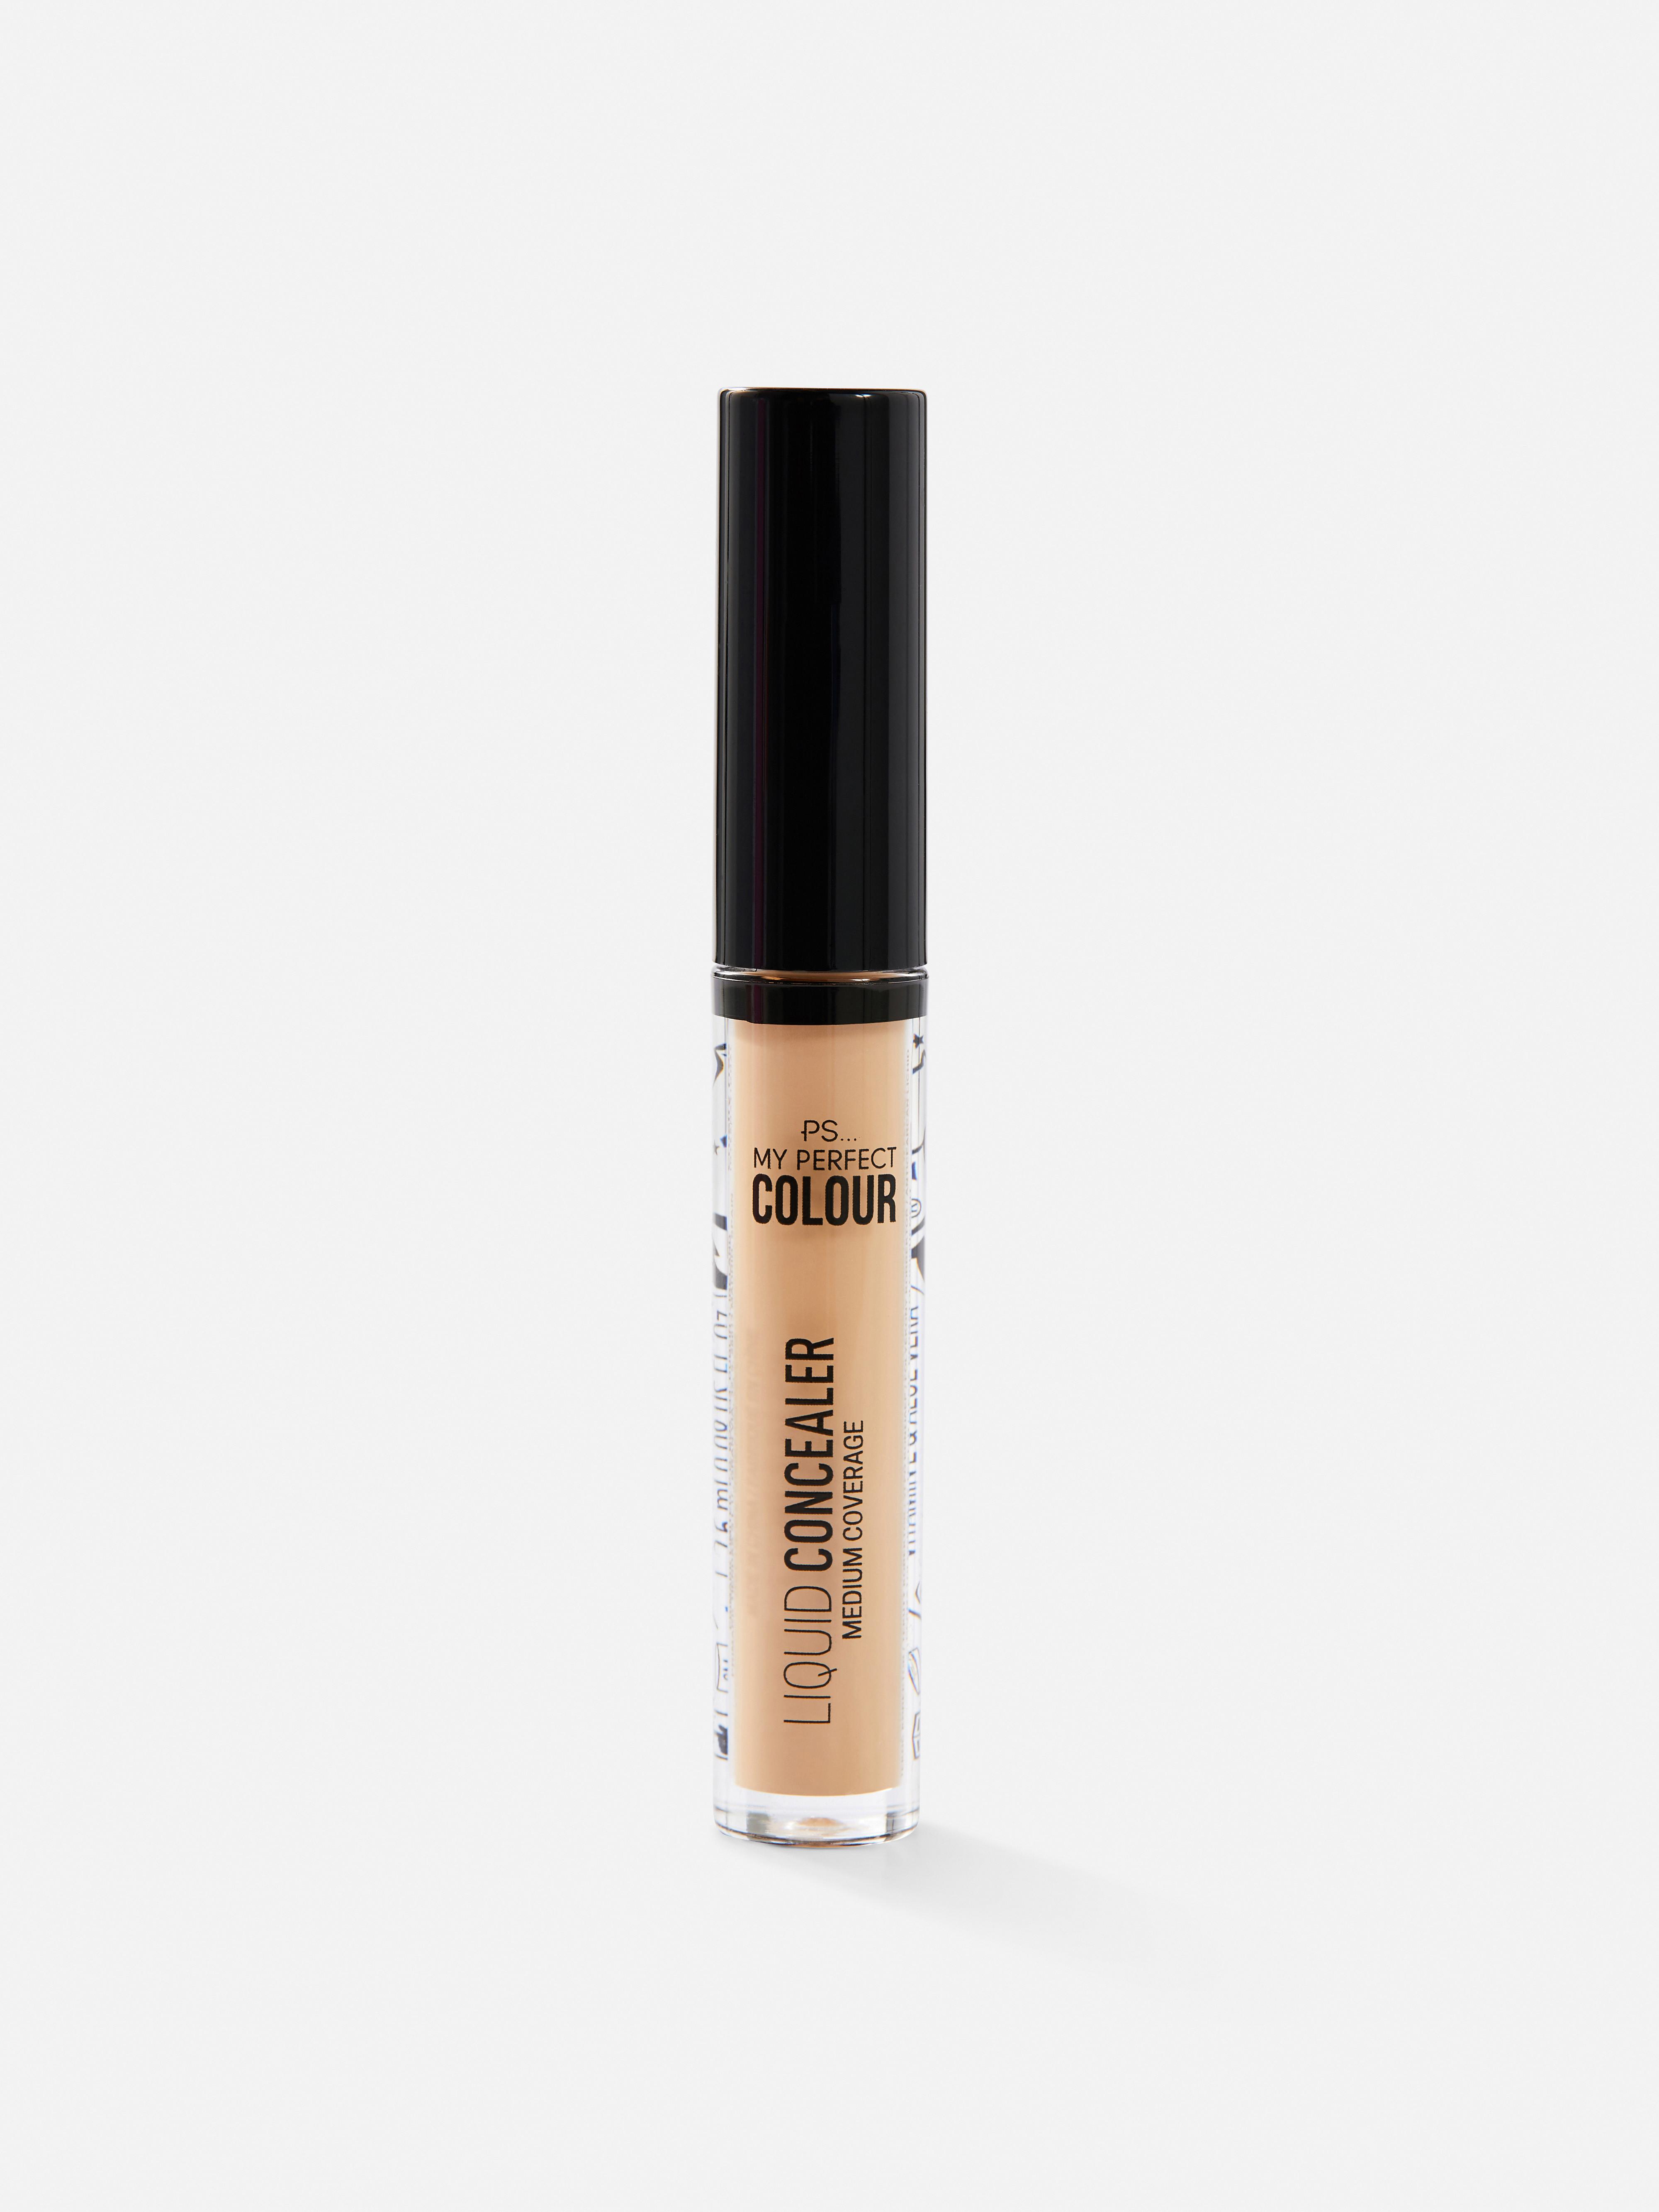 PS My Perfect Colour Concealer